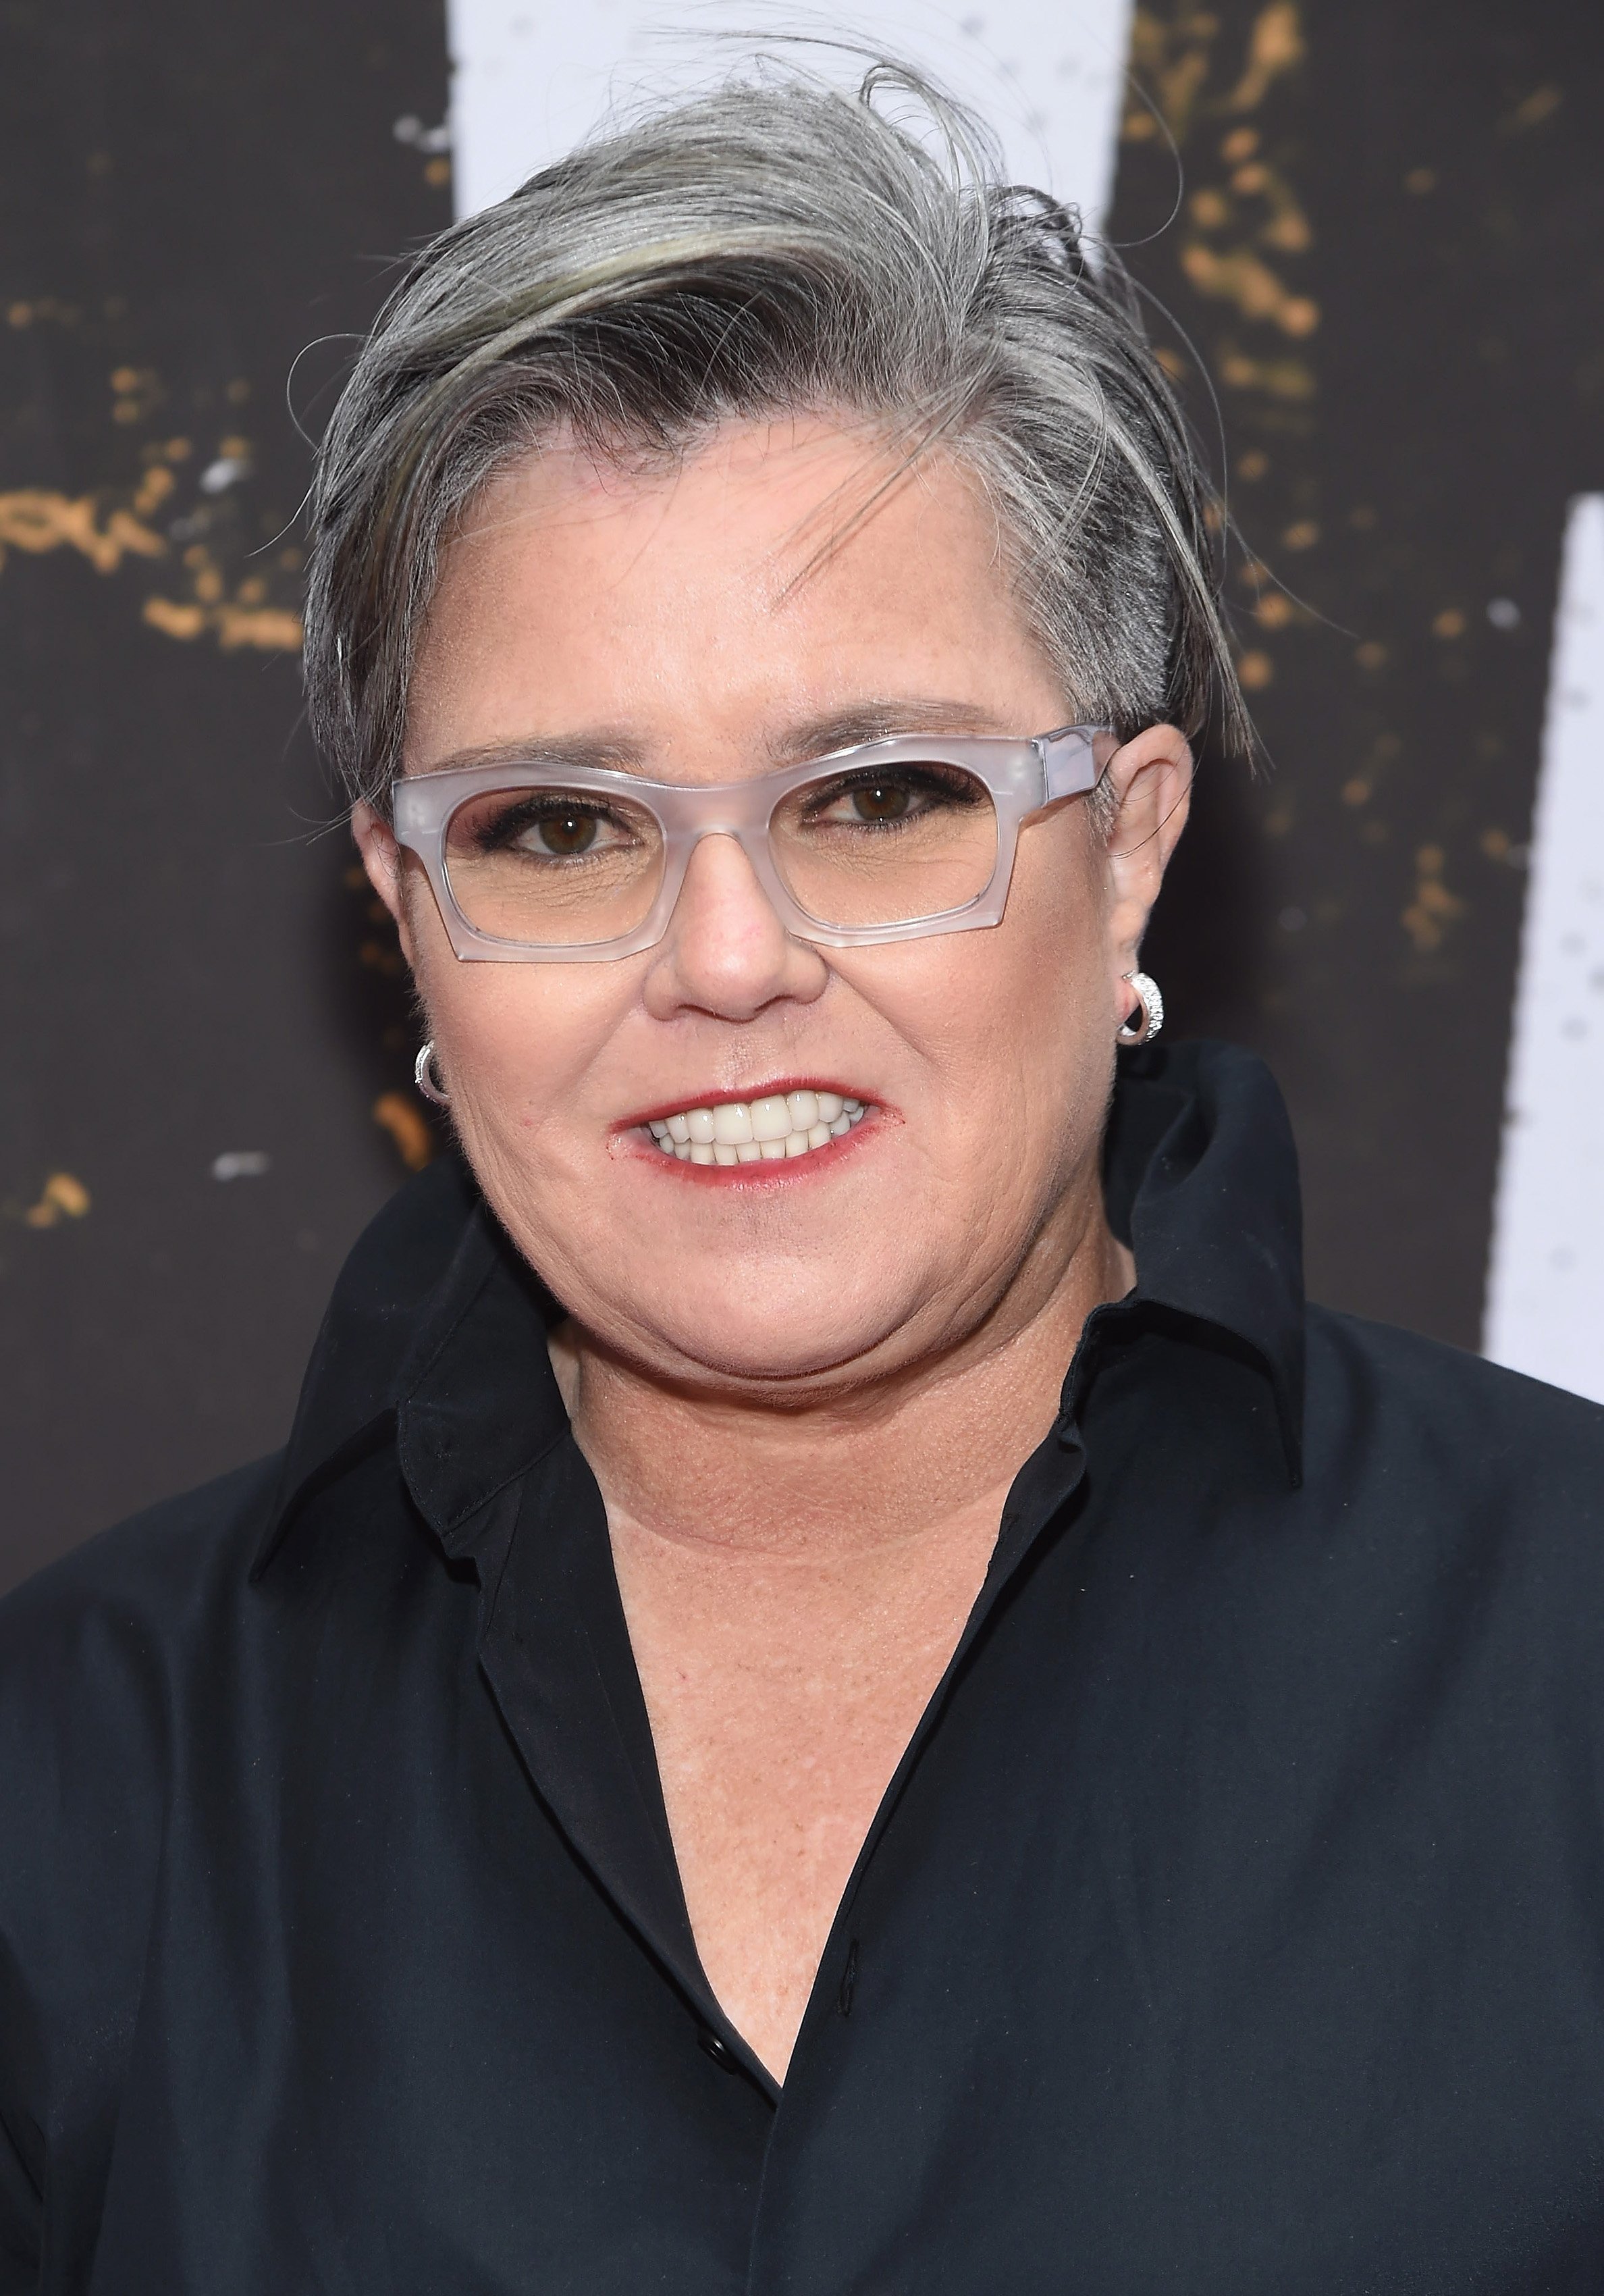 Rosie O'Donnell attends the Broadway opening night of 'Oklahoma' at Circle on April 07, 2019. | Source: Getty Images